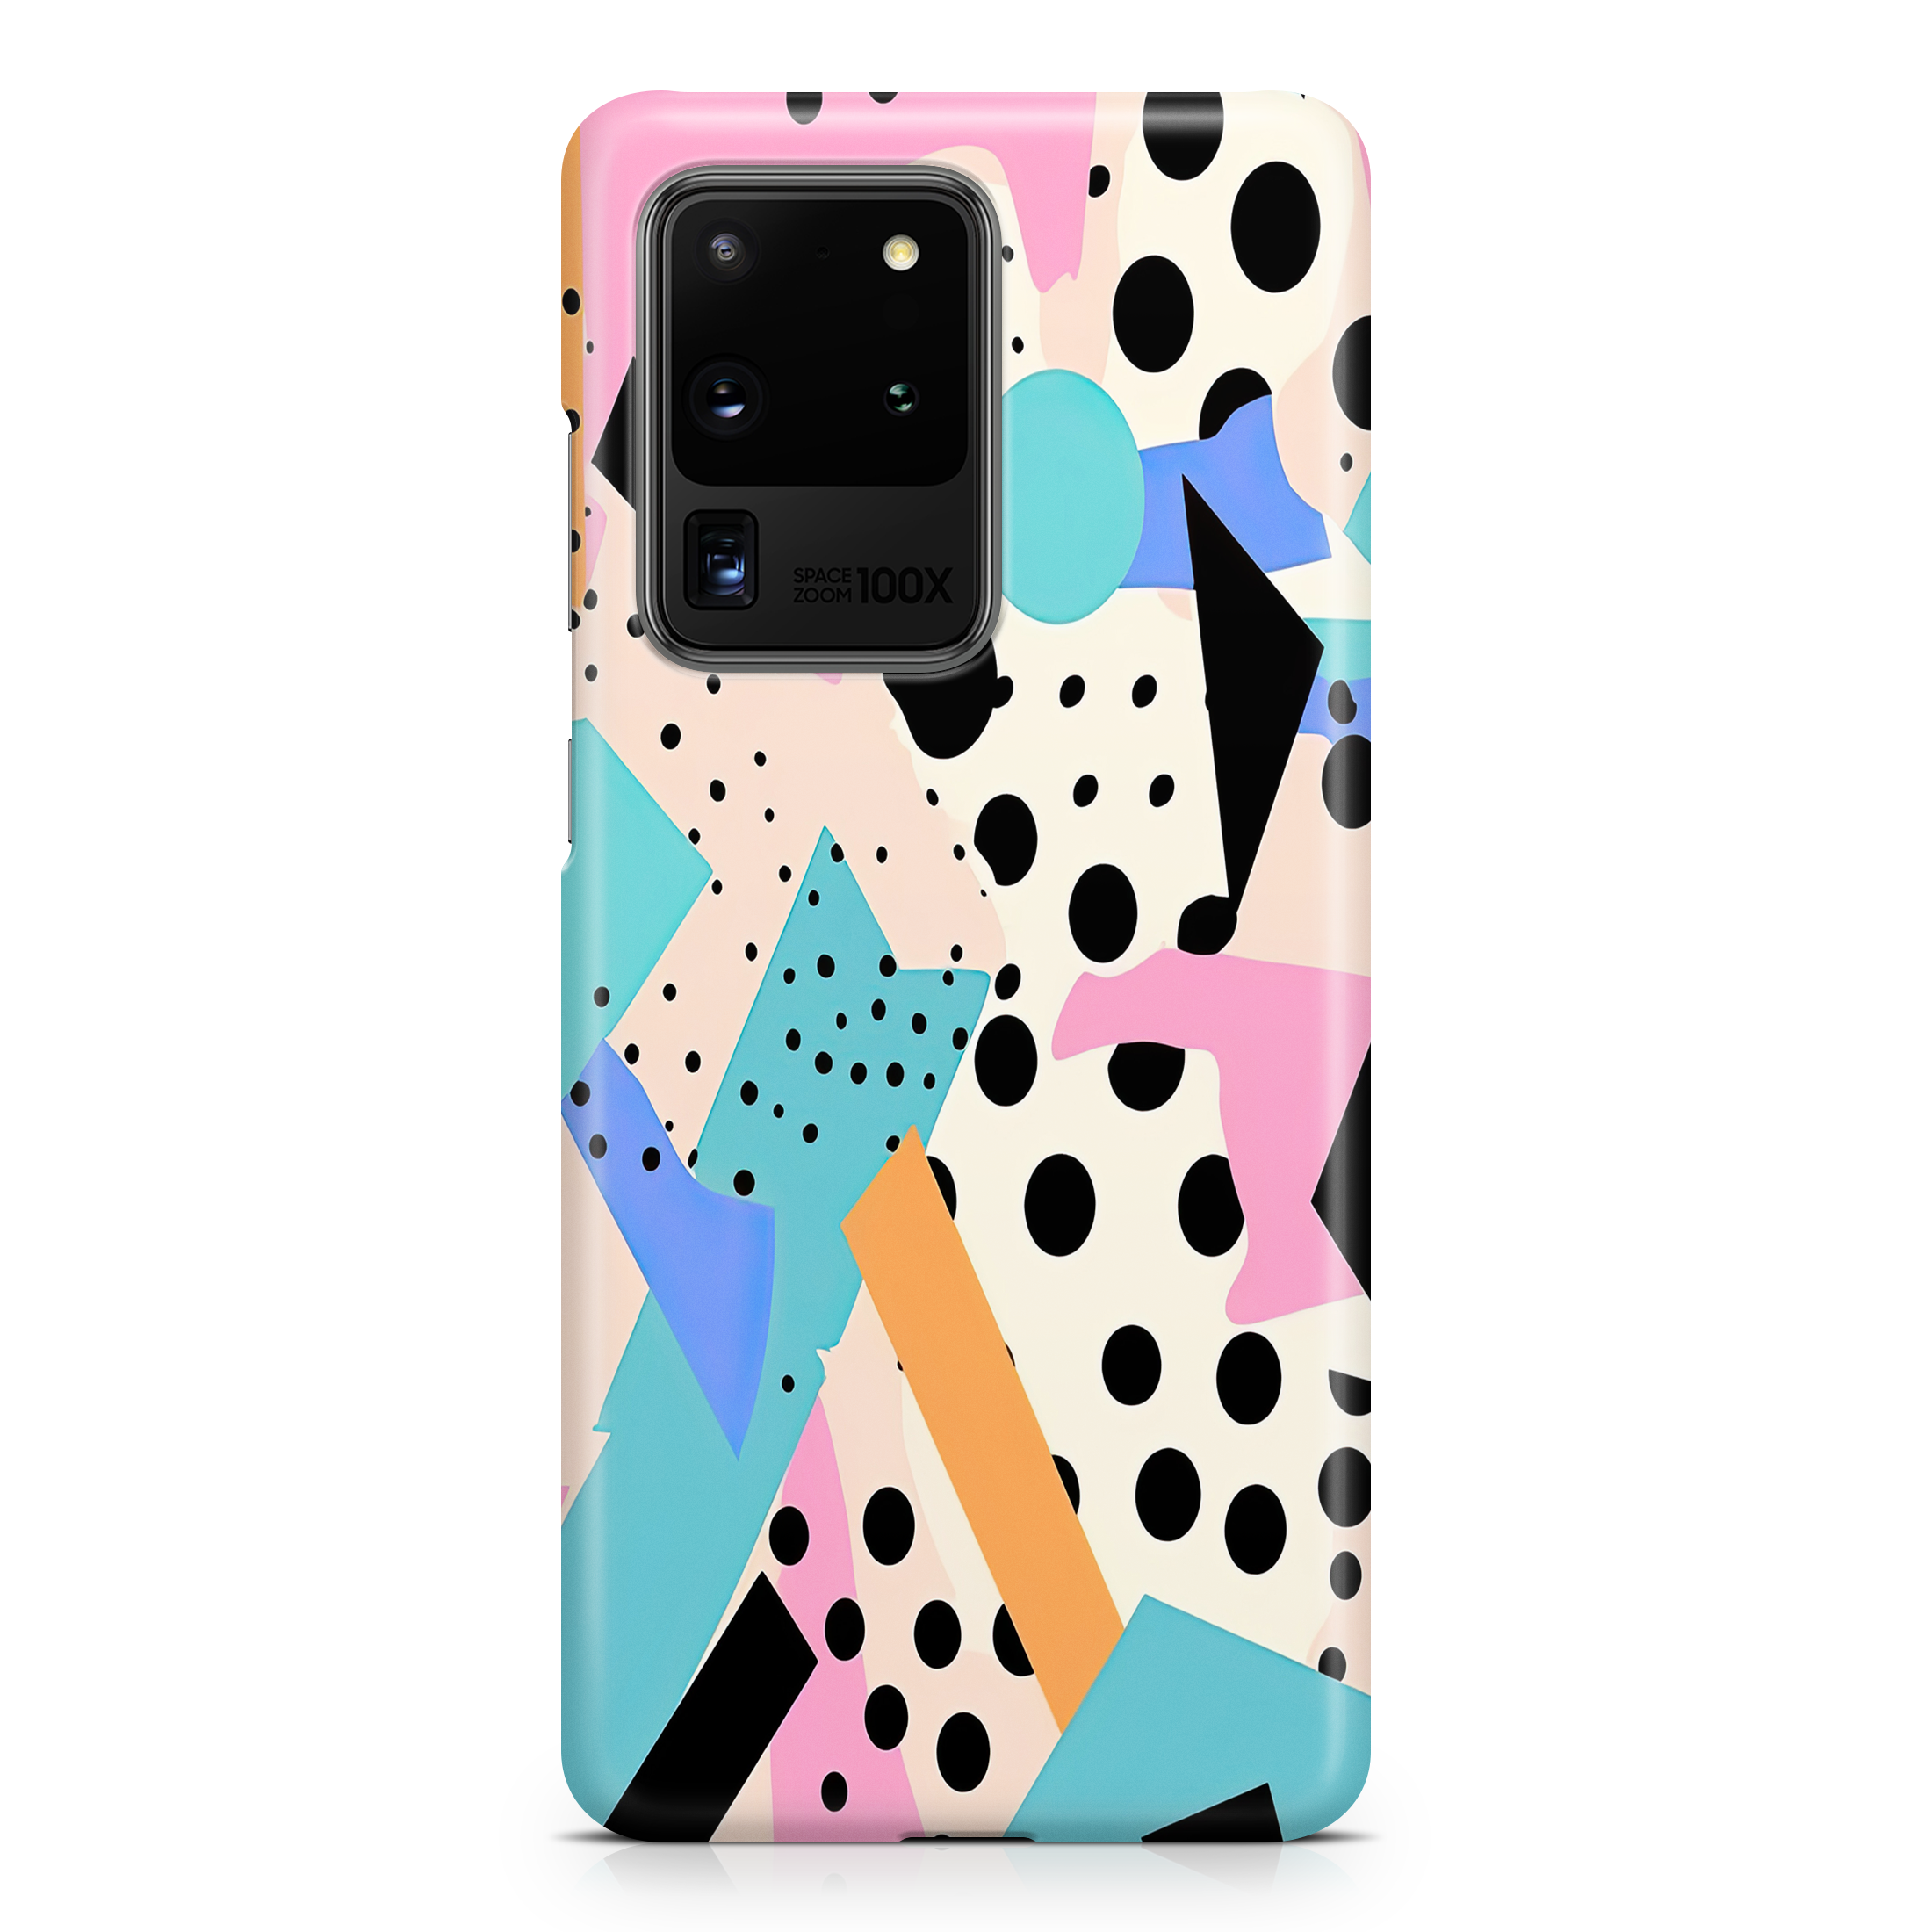 Meadow Melodies - Samsung phone case designs by CaseSwagger